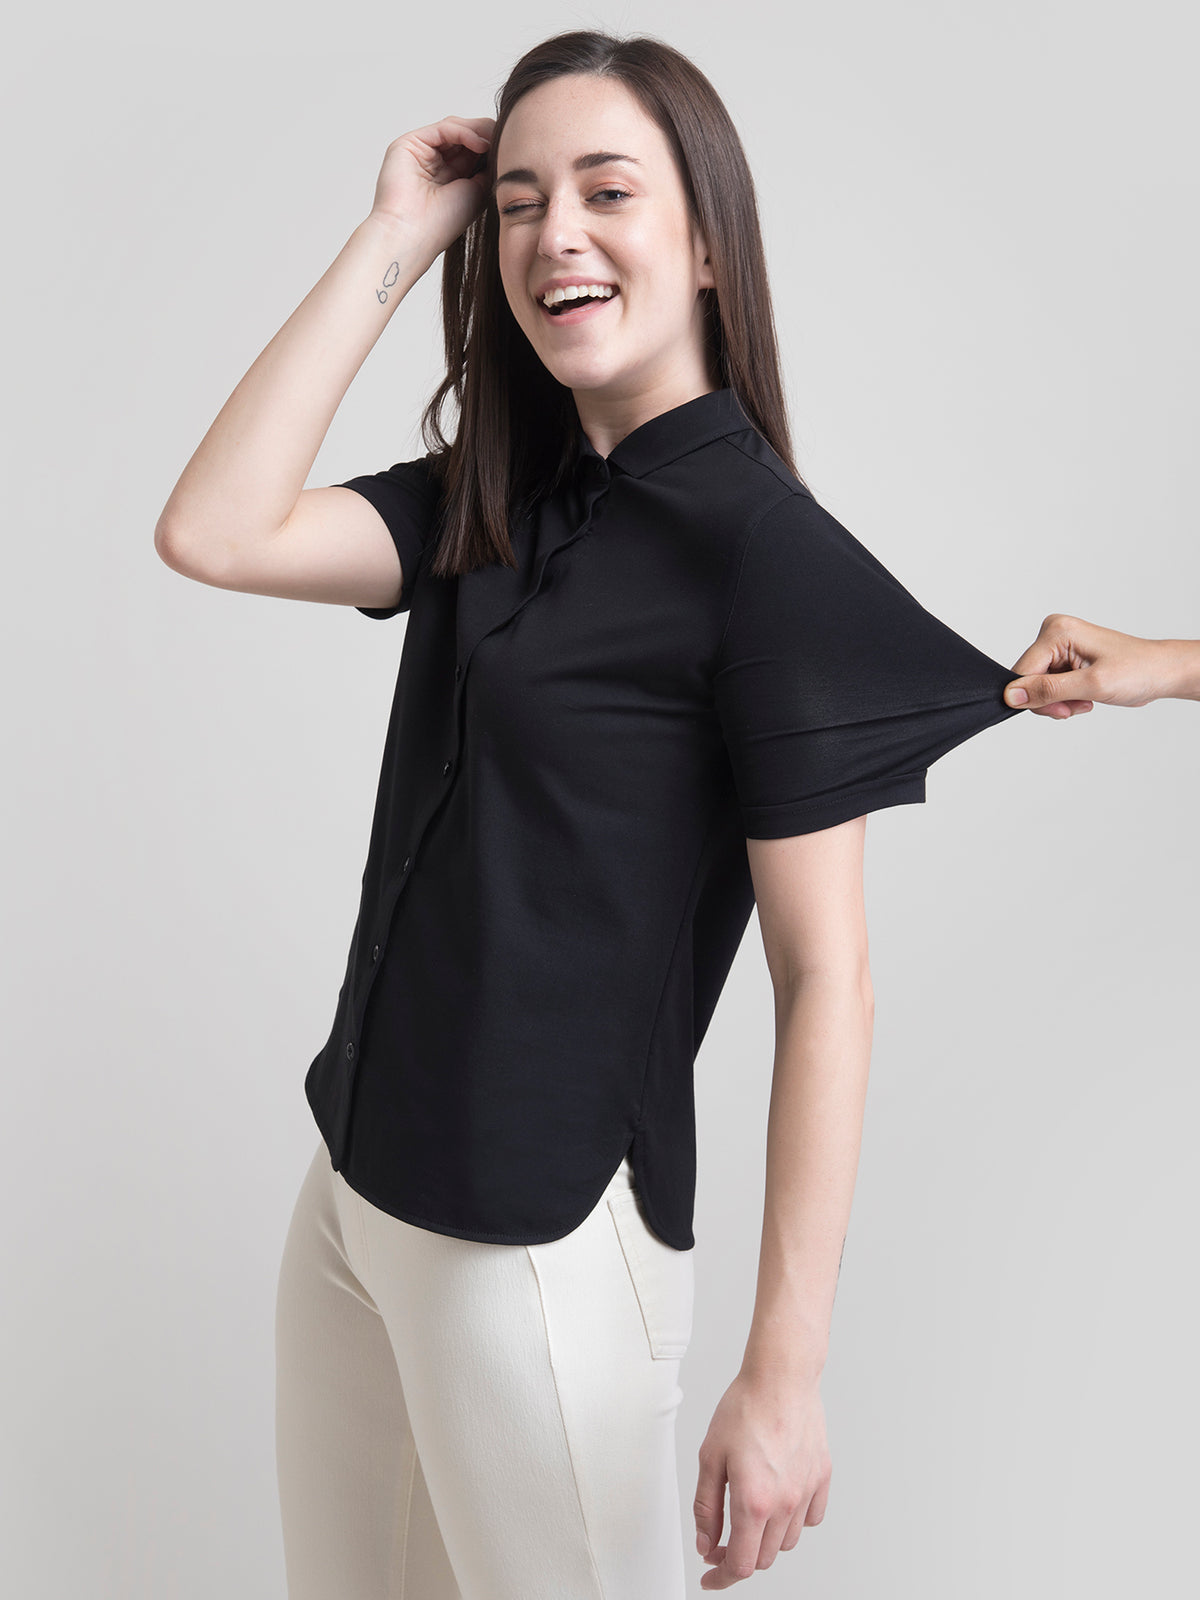 Cotton Knitted Shirt -Black